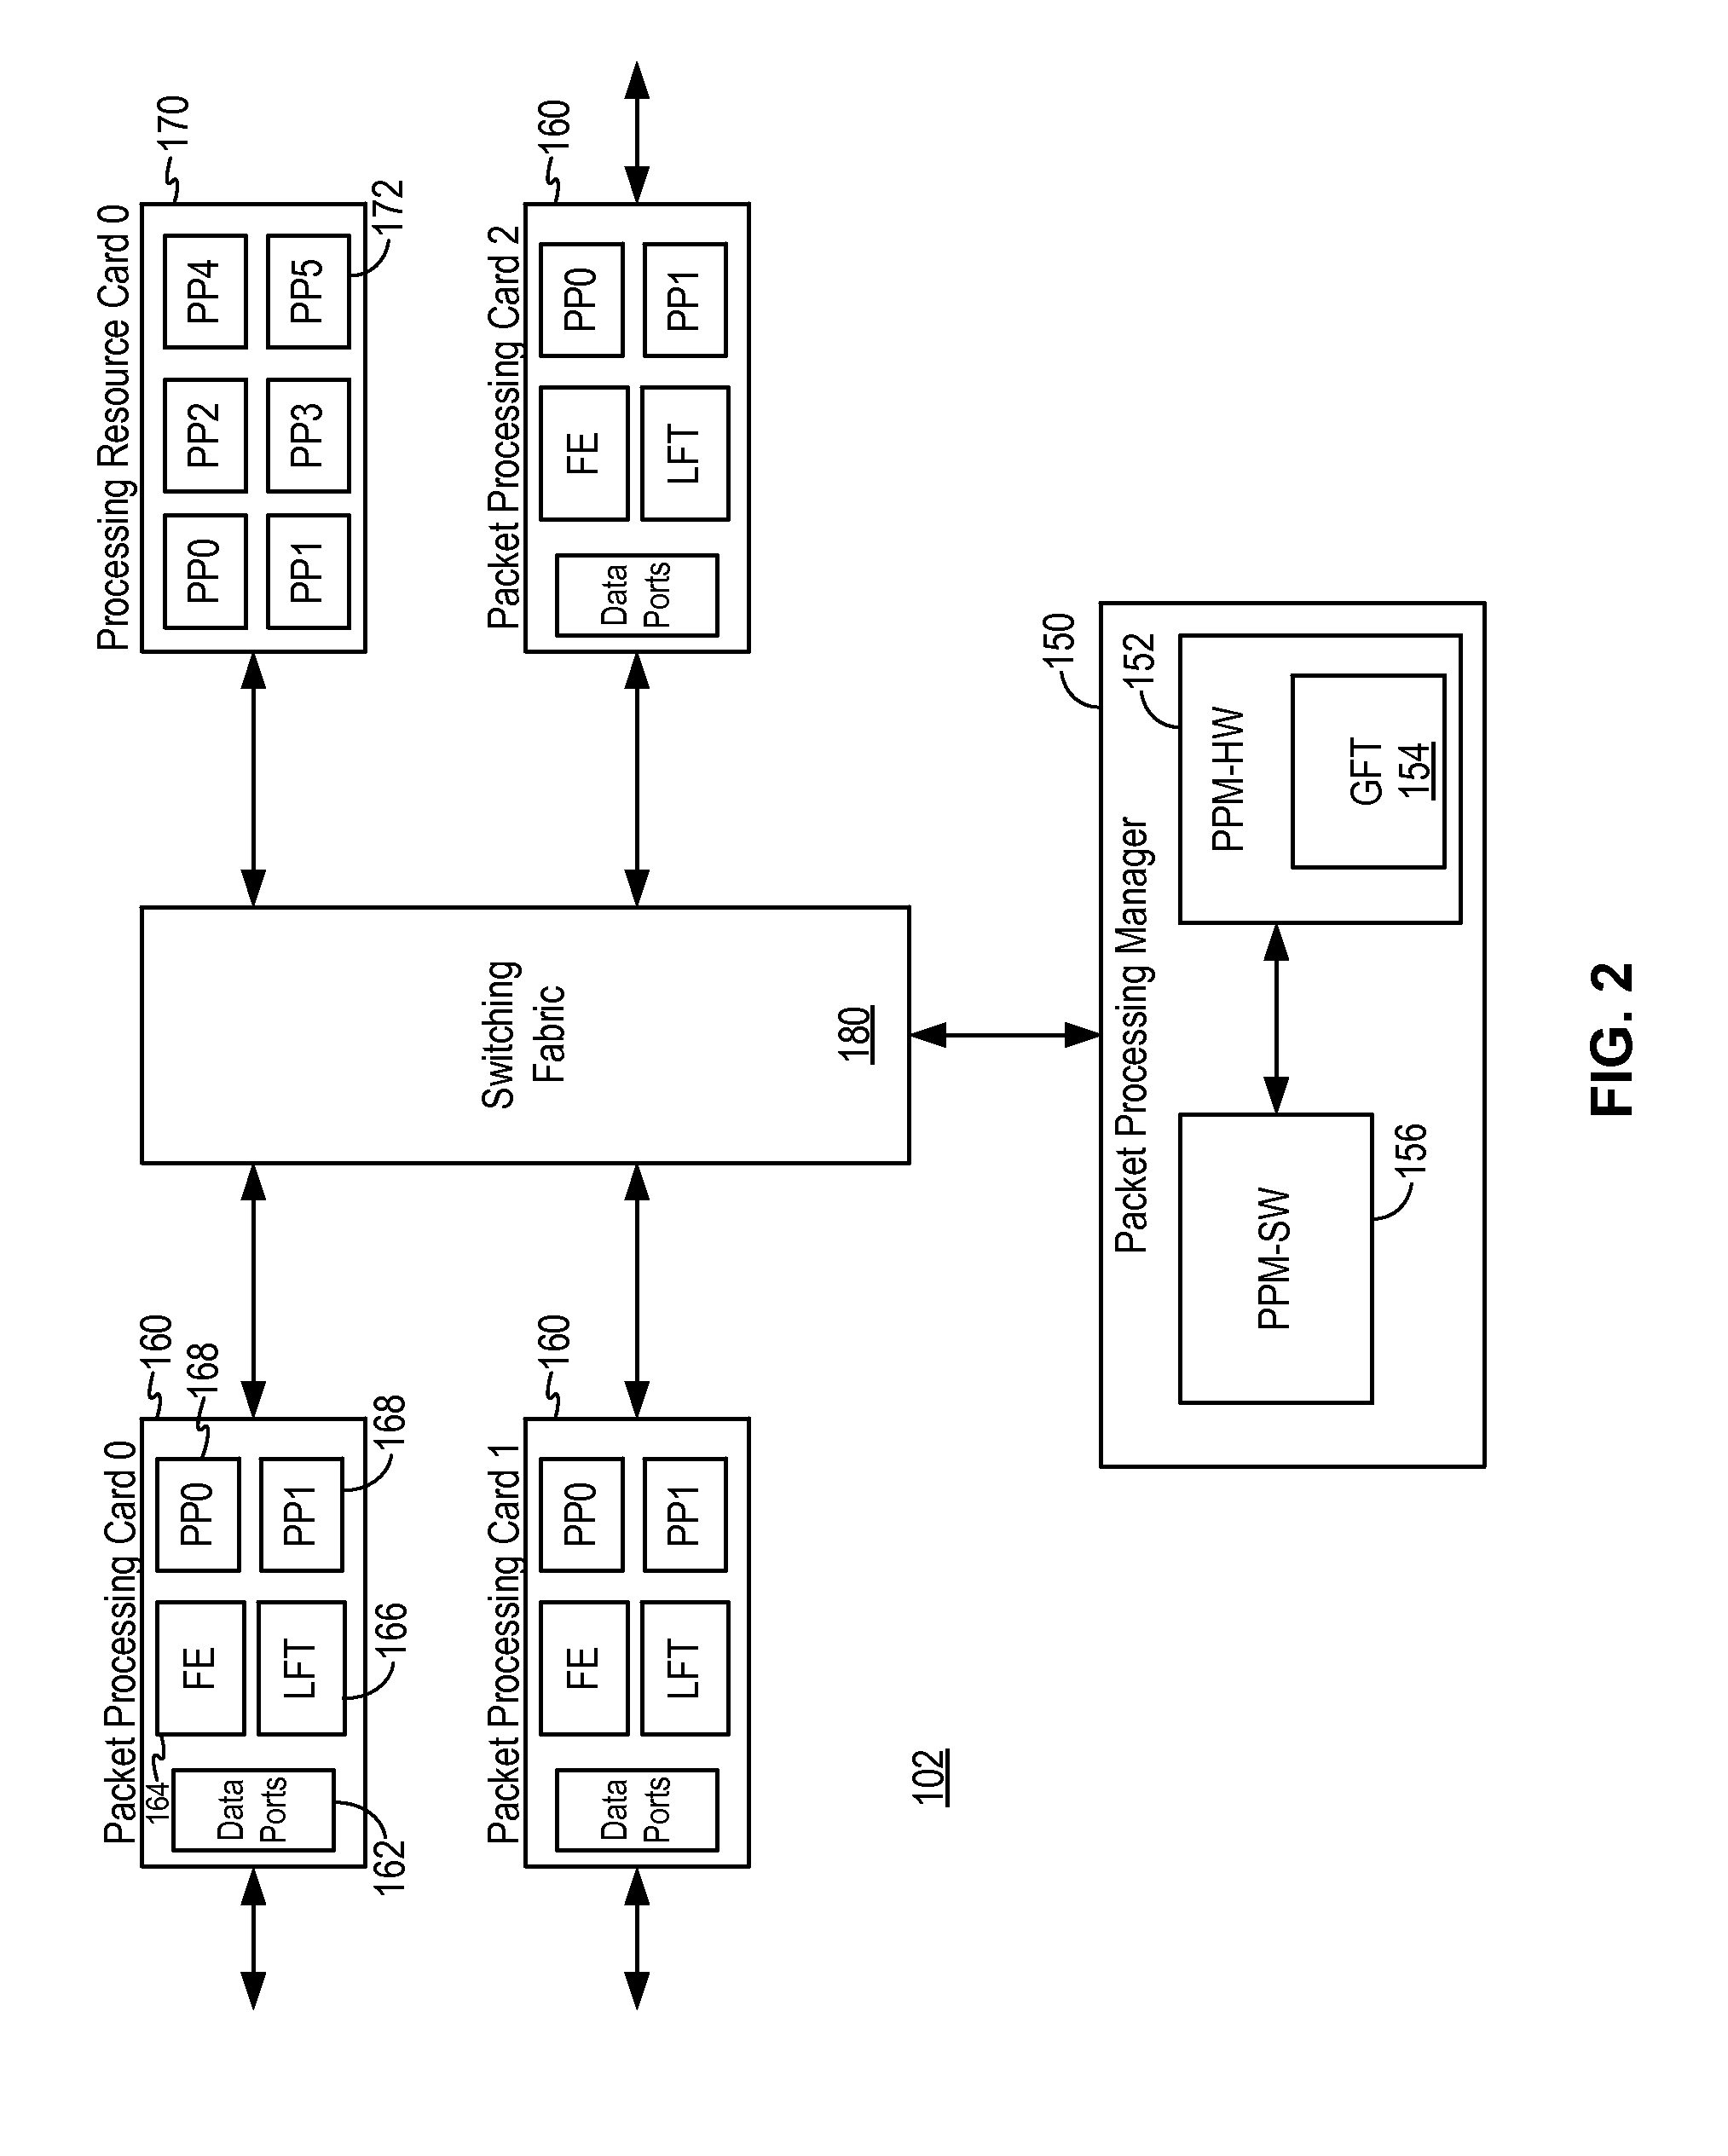 Event aggregation in a distributed processor system